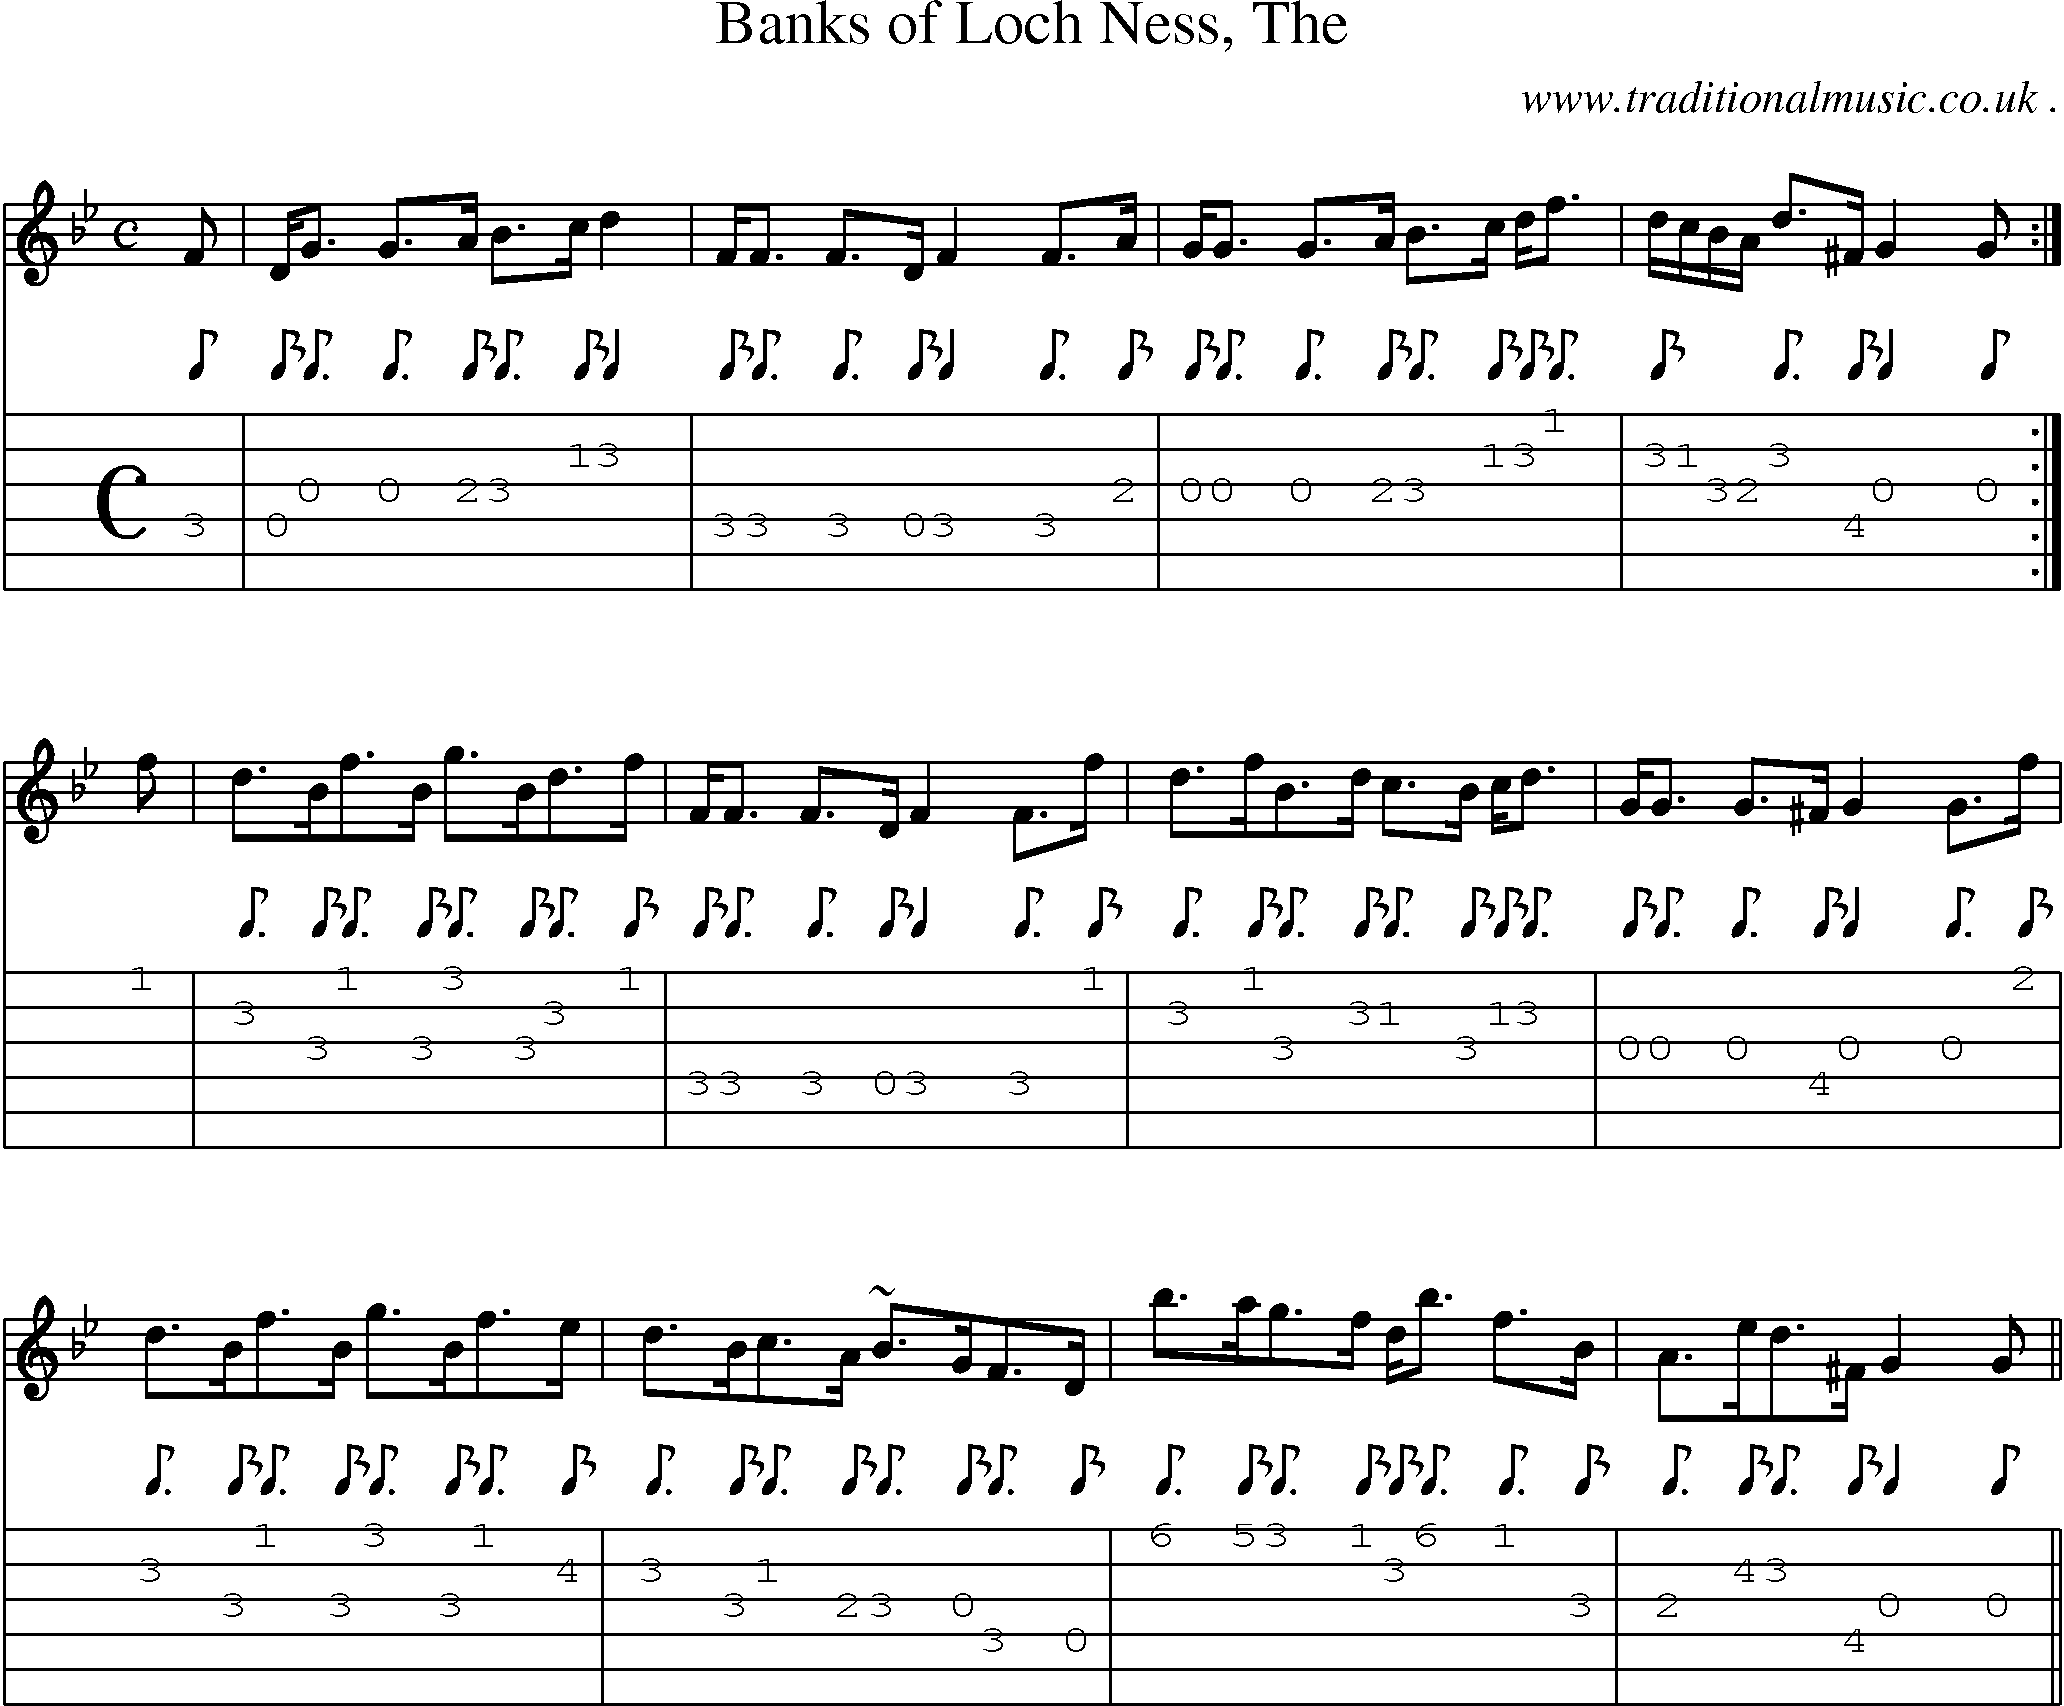 Sheet-music  score, Chords and Guitar Tabs for Banks Of Loch Ness The